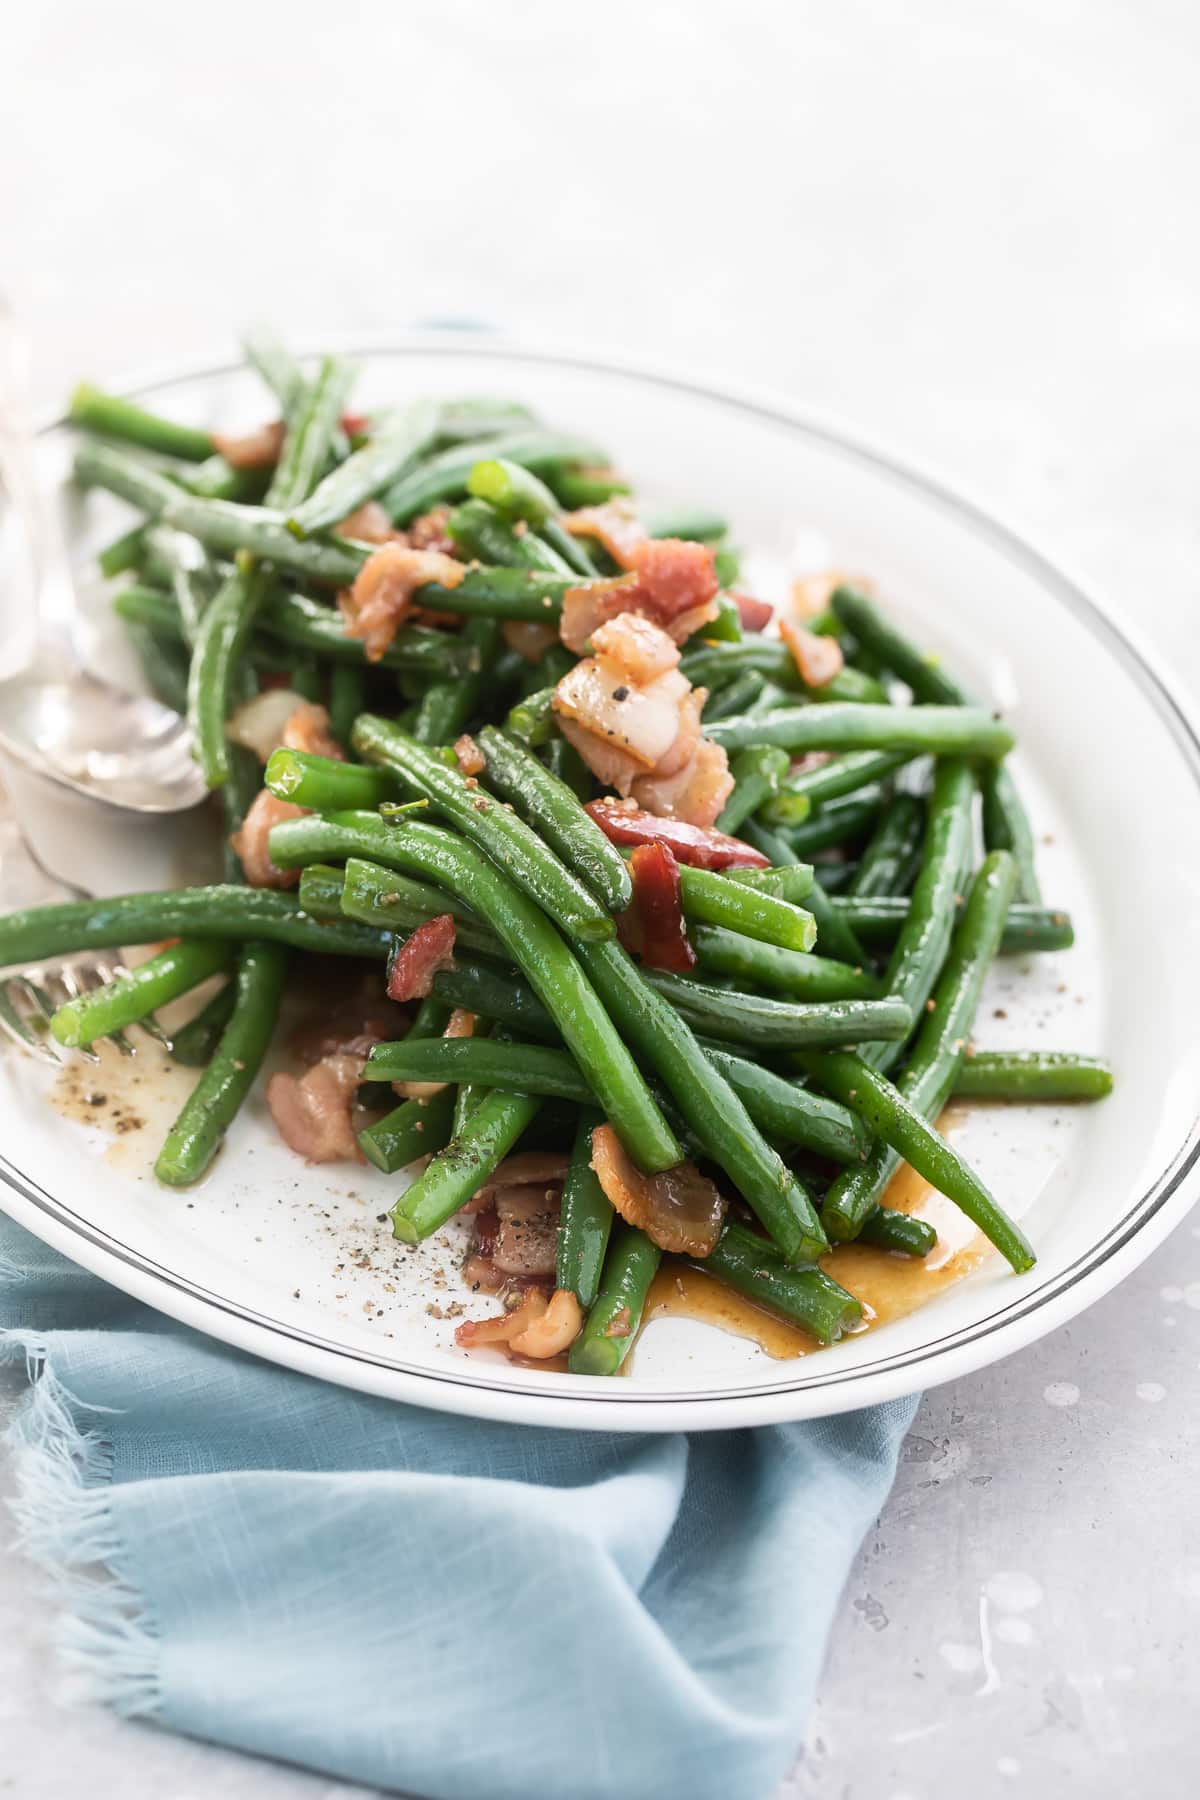 A platter full of green beans and bacon.